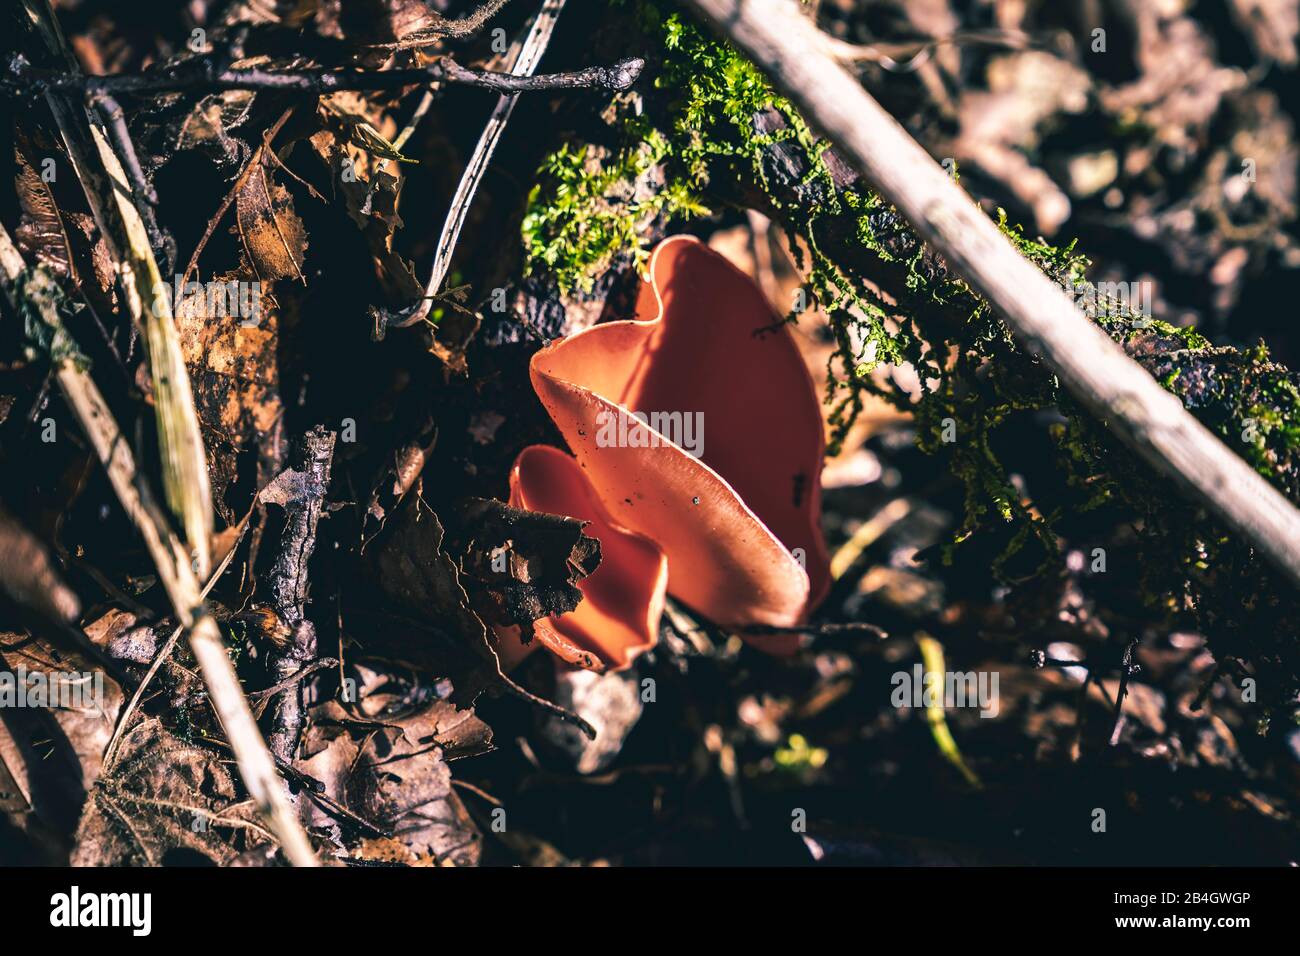 scarlet red cup, sarcoscypha coccinea, mushroom, forest, leaves, moss Stock Photo